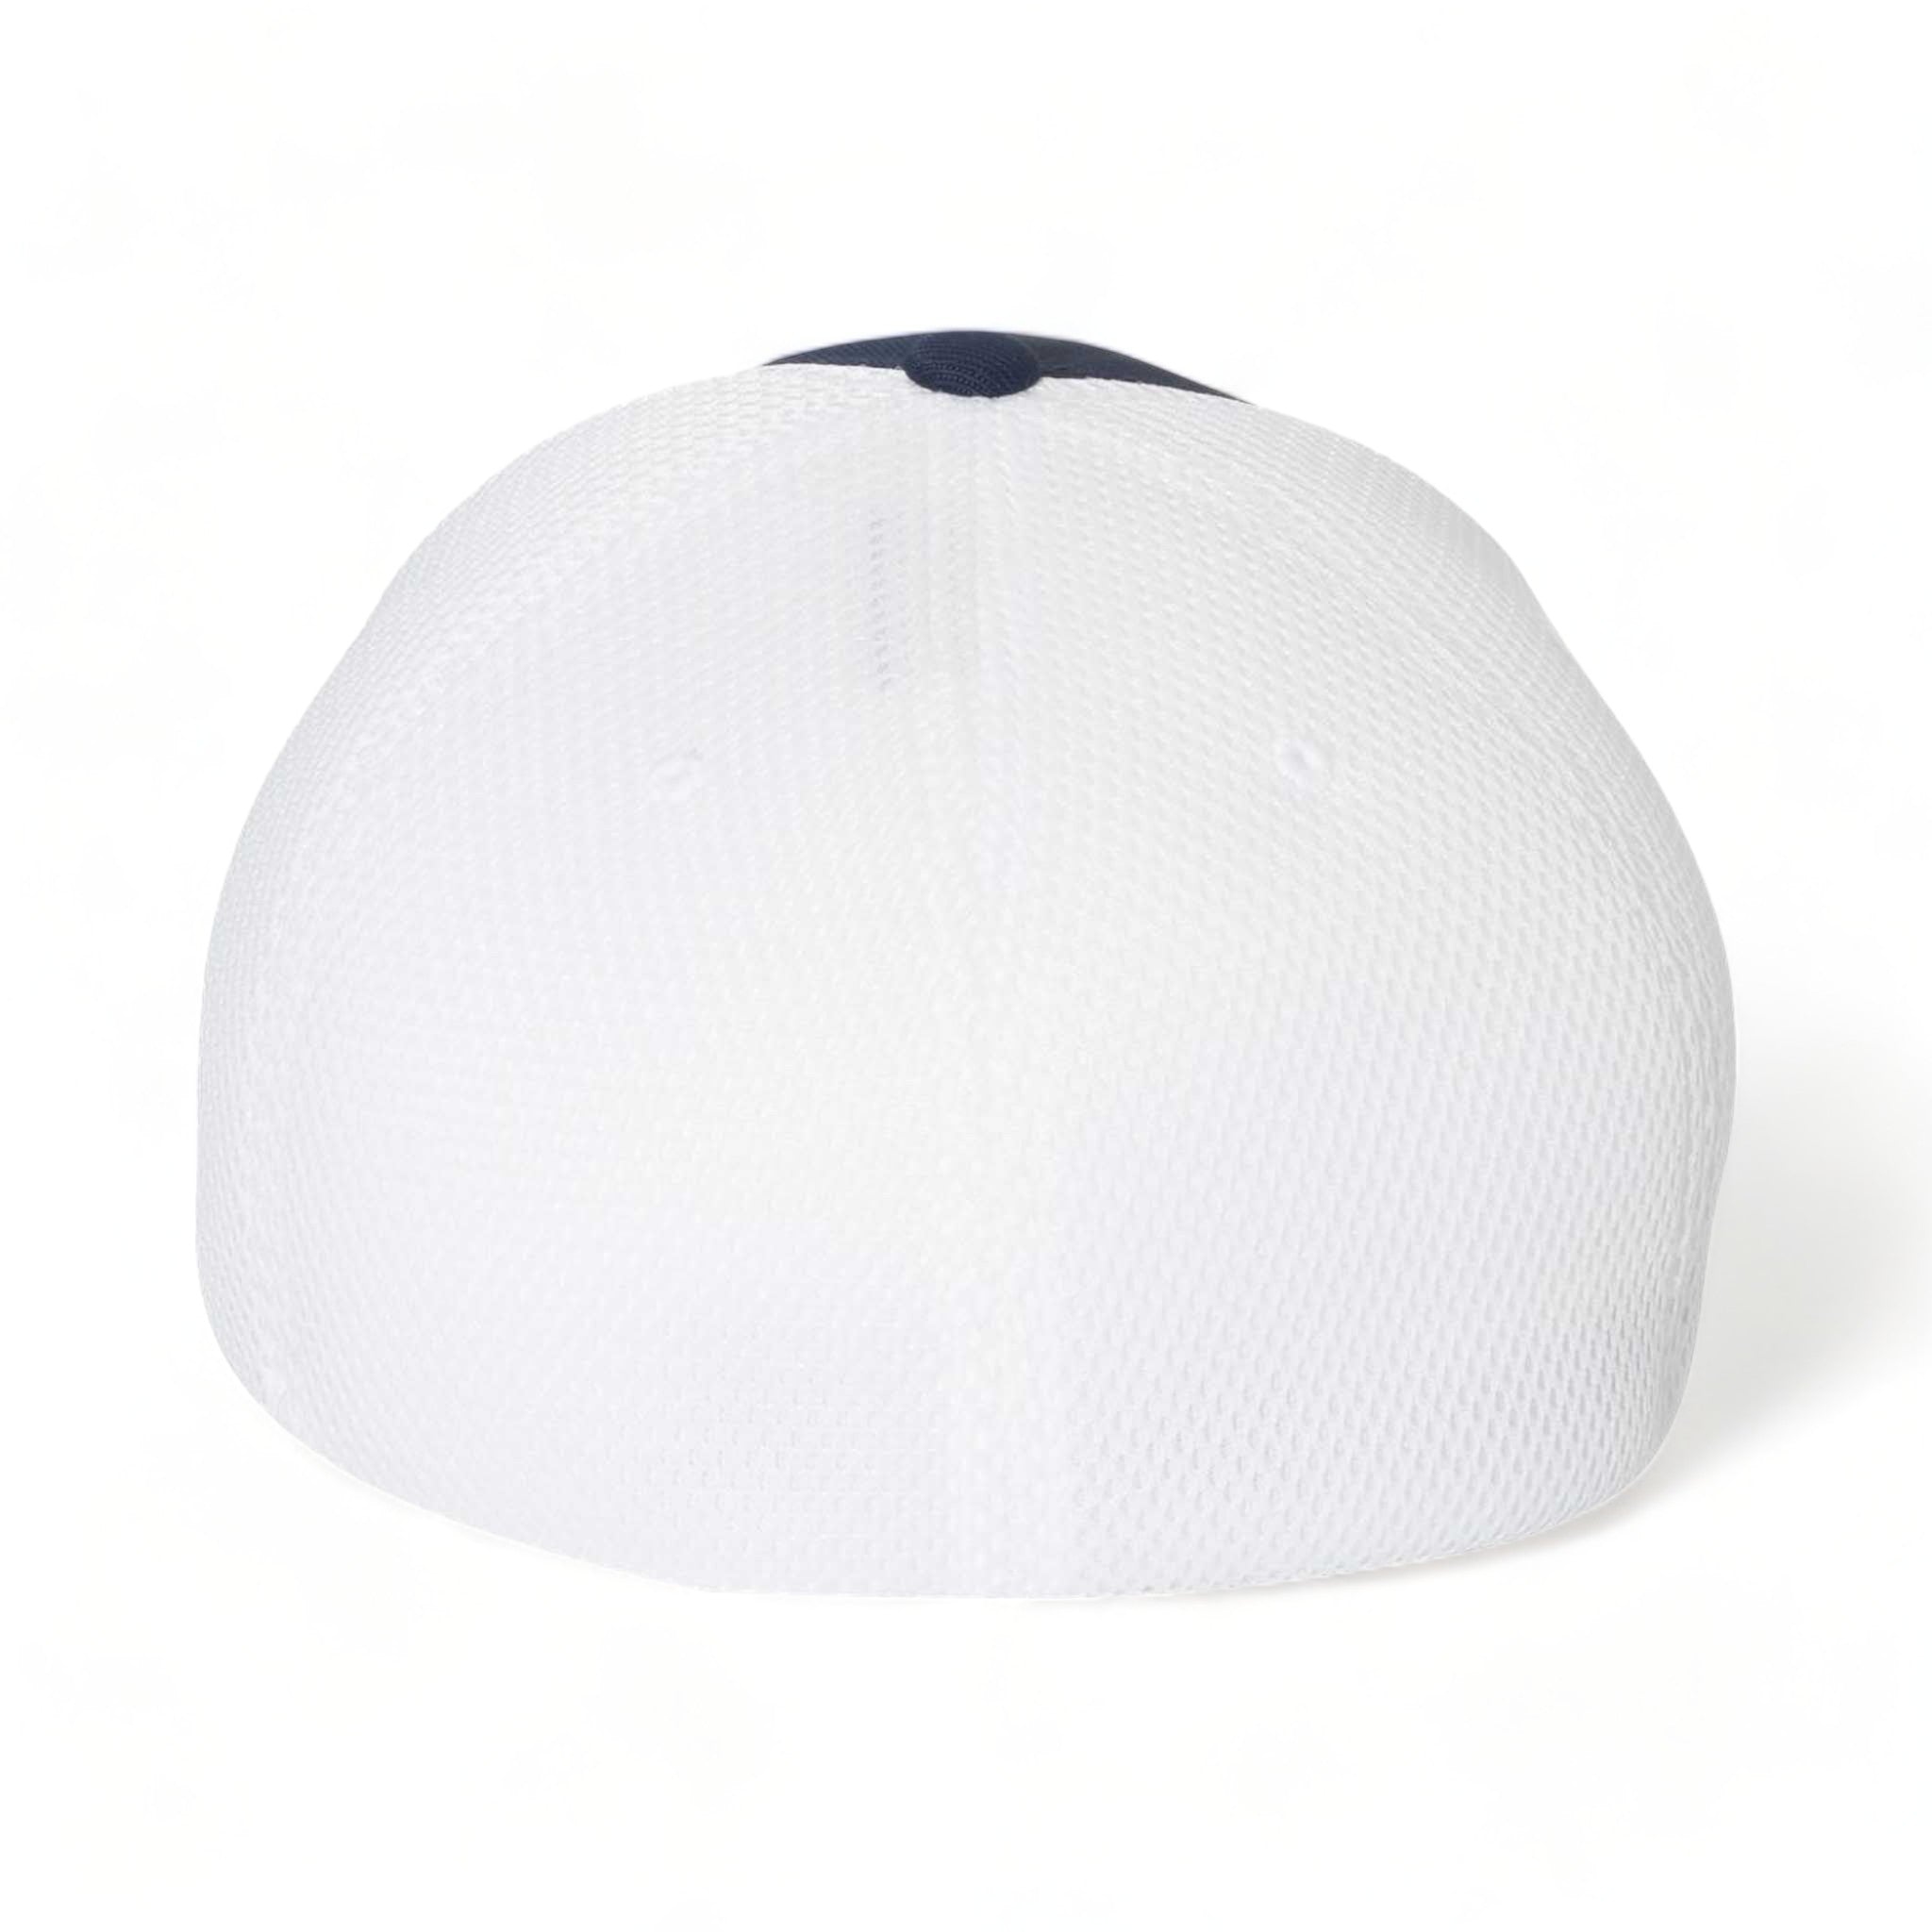 Back view of Flexfit 6533 custom hat in navy and white